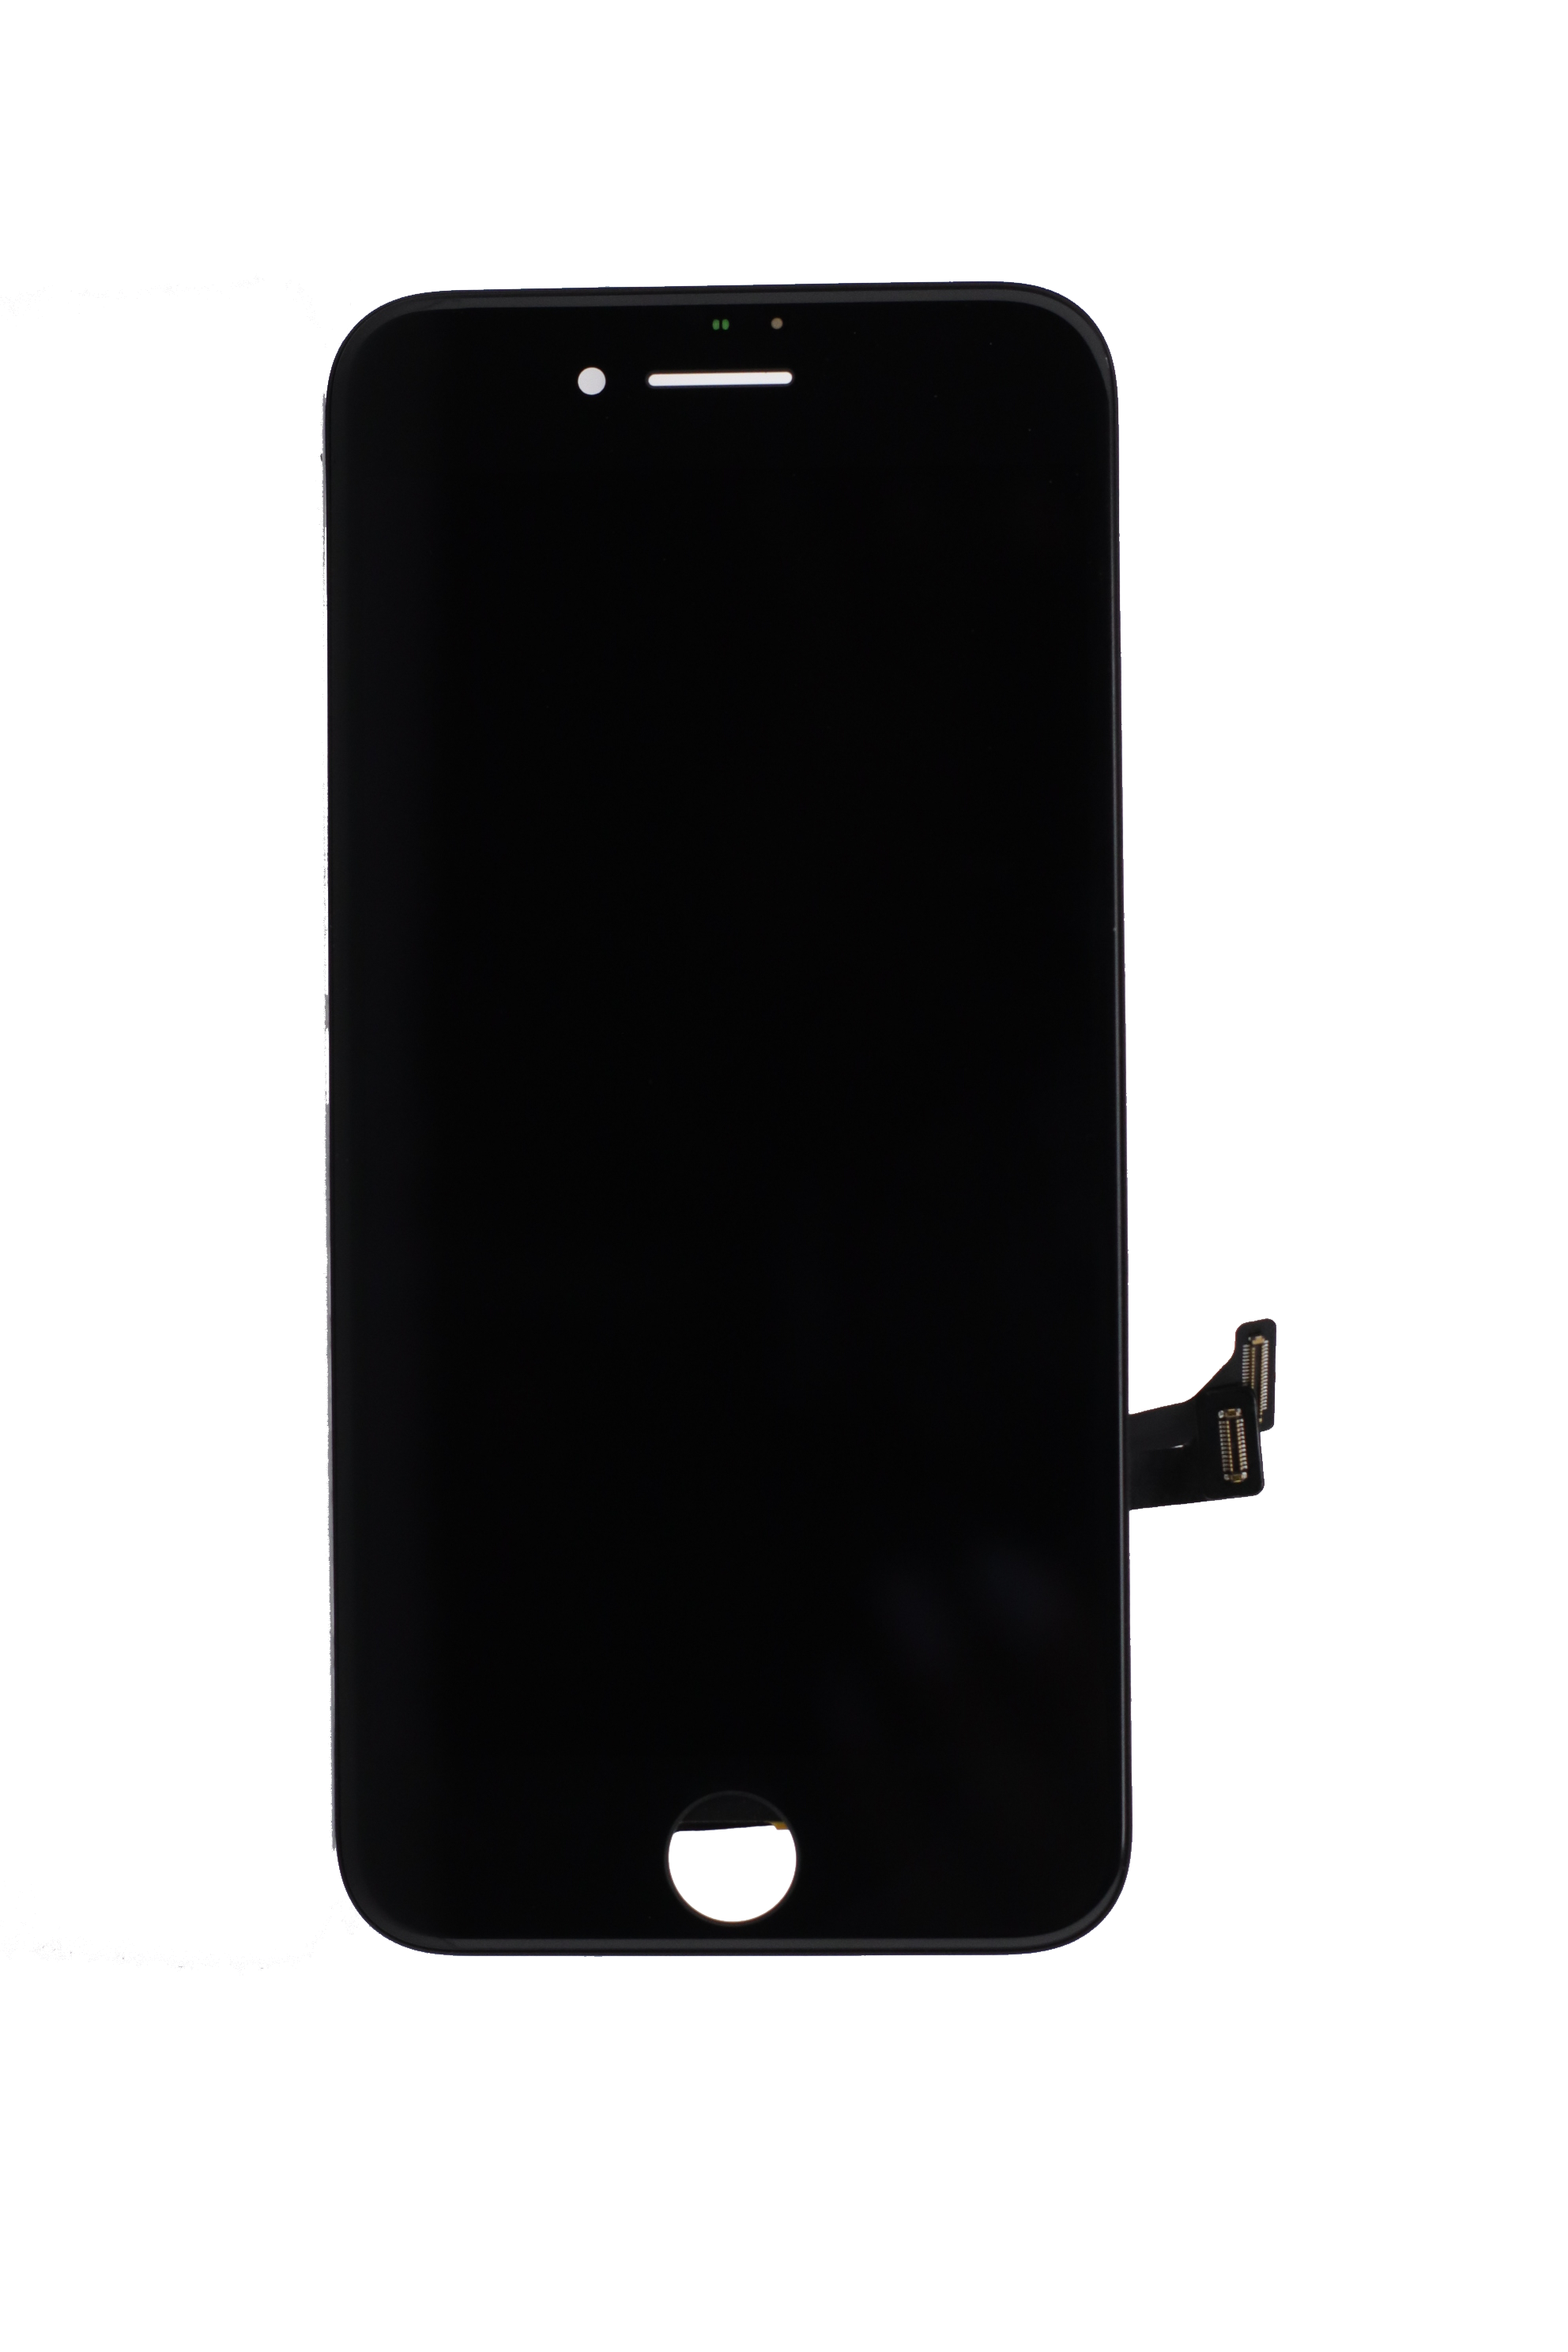 Premium LCD Assembly for use with iPhone 7 (Black)